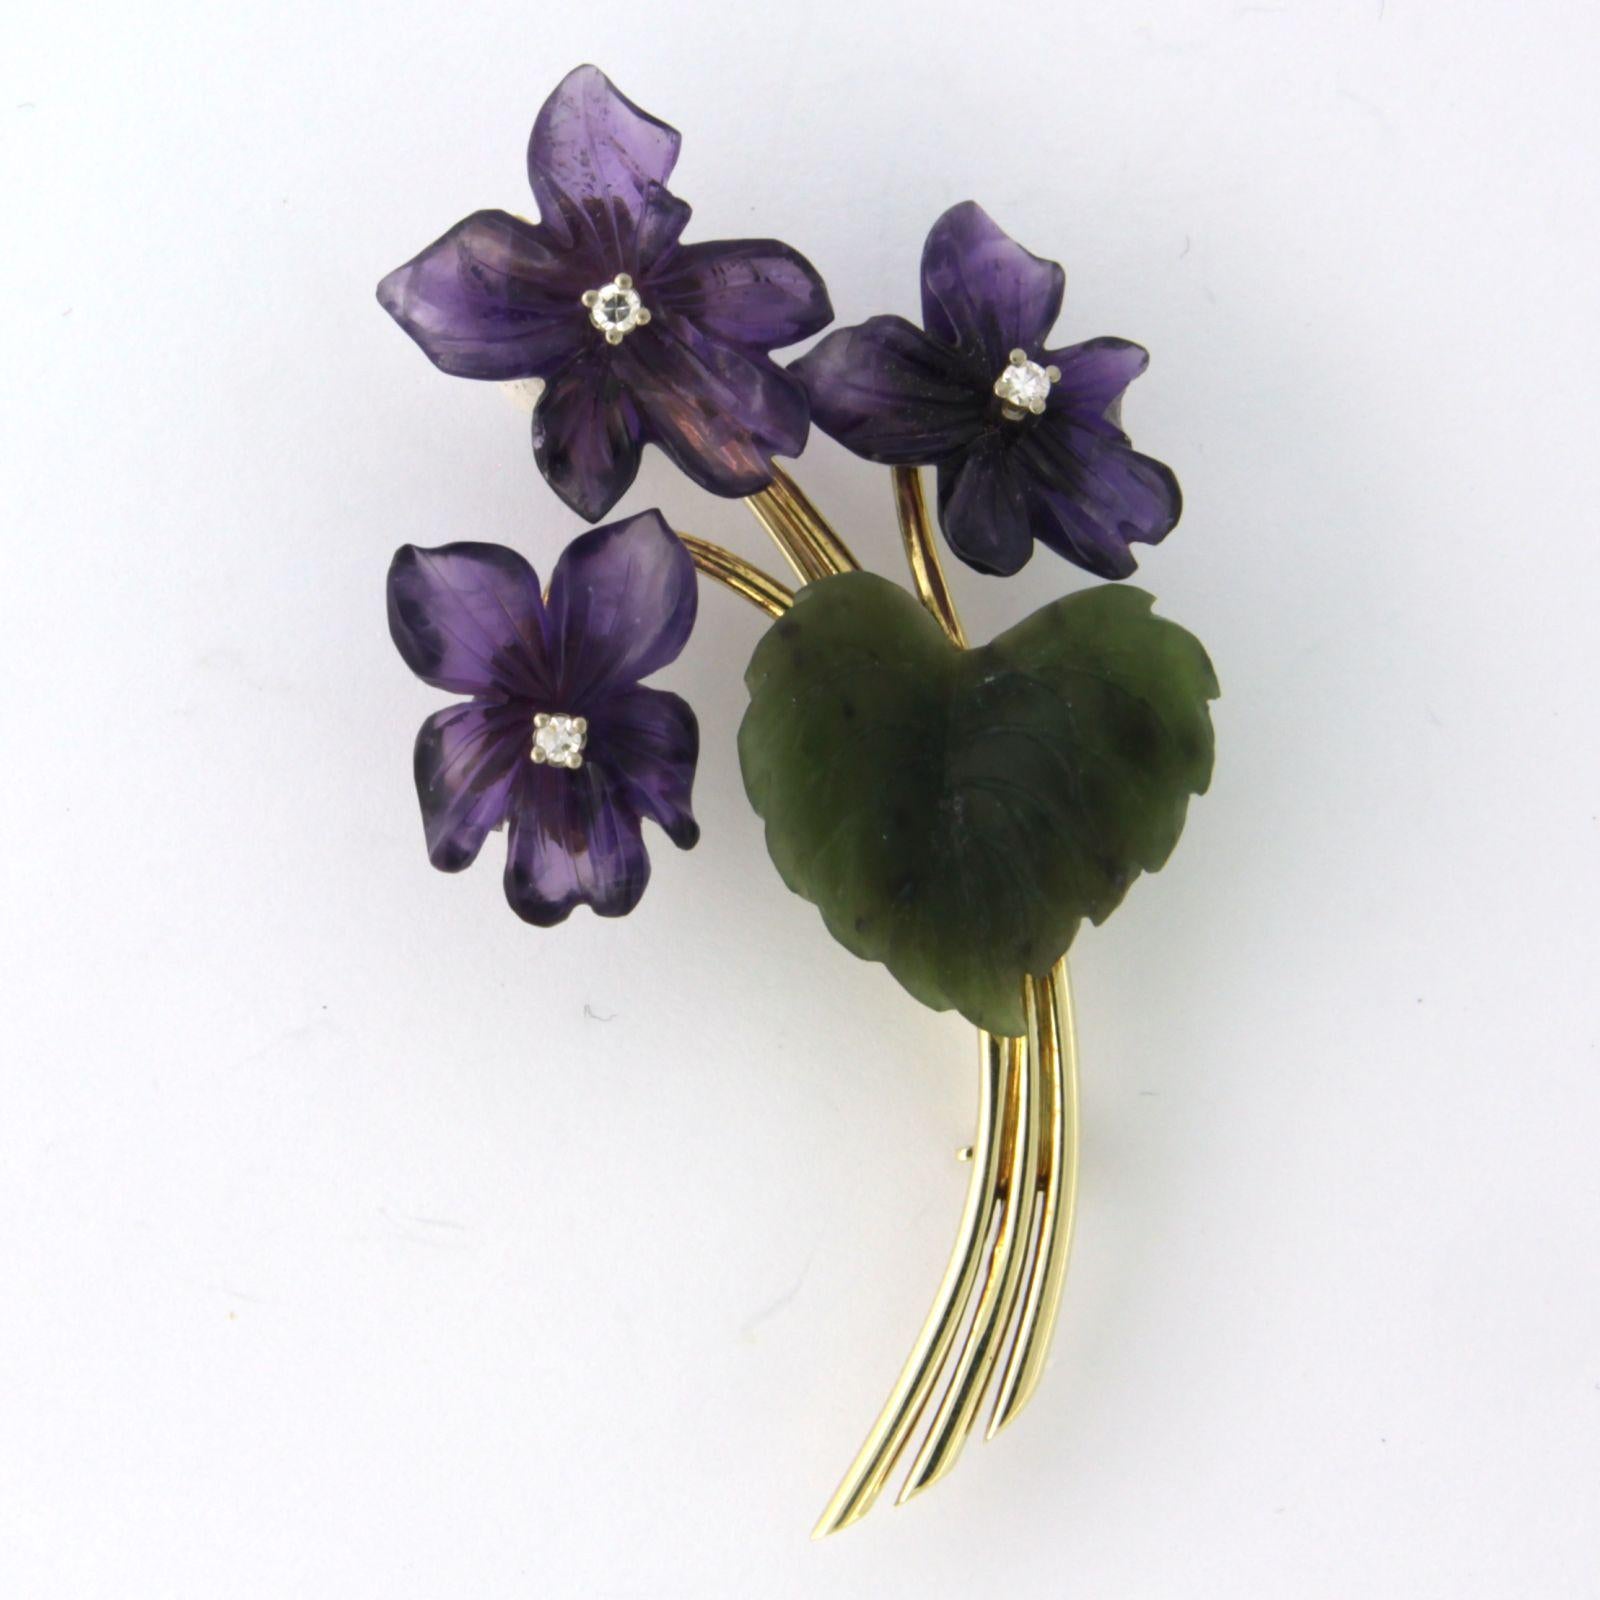 14k yellow gold brooch in the shape of a bunch of flowers, set with amethyst flowers, jade leaves and brilliant cut diamonds, 0.03ct in total - F/G - VS/SI

detailed description:

The size of the brooch is 5.0 cm long by 2.9 cm wide

weight: 7.7